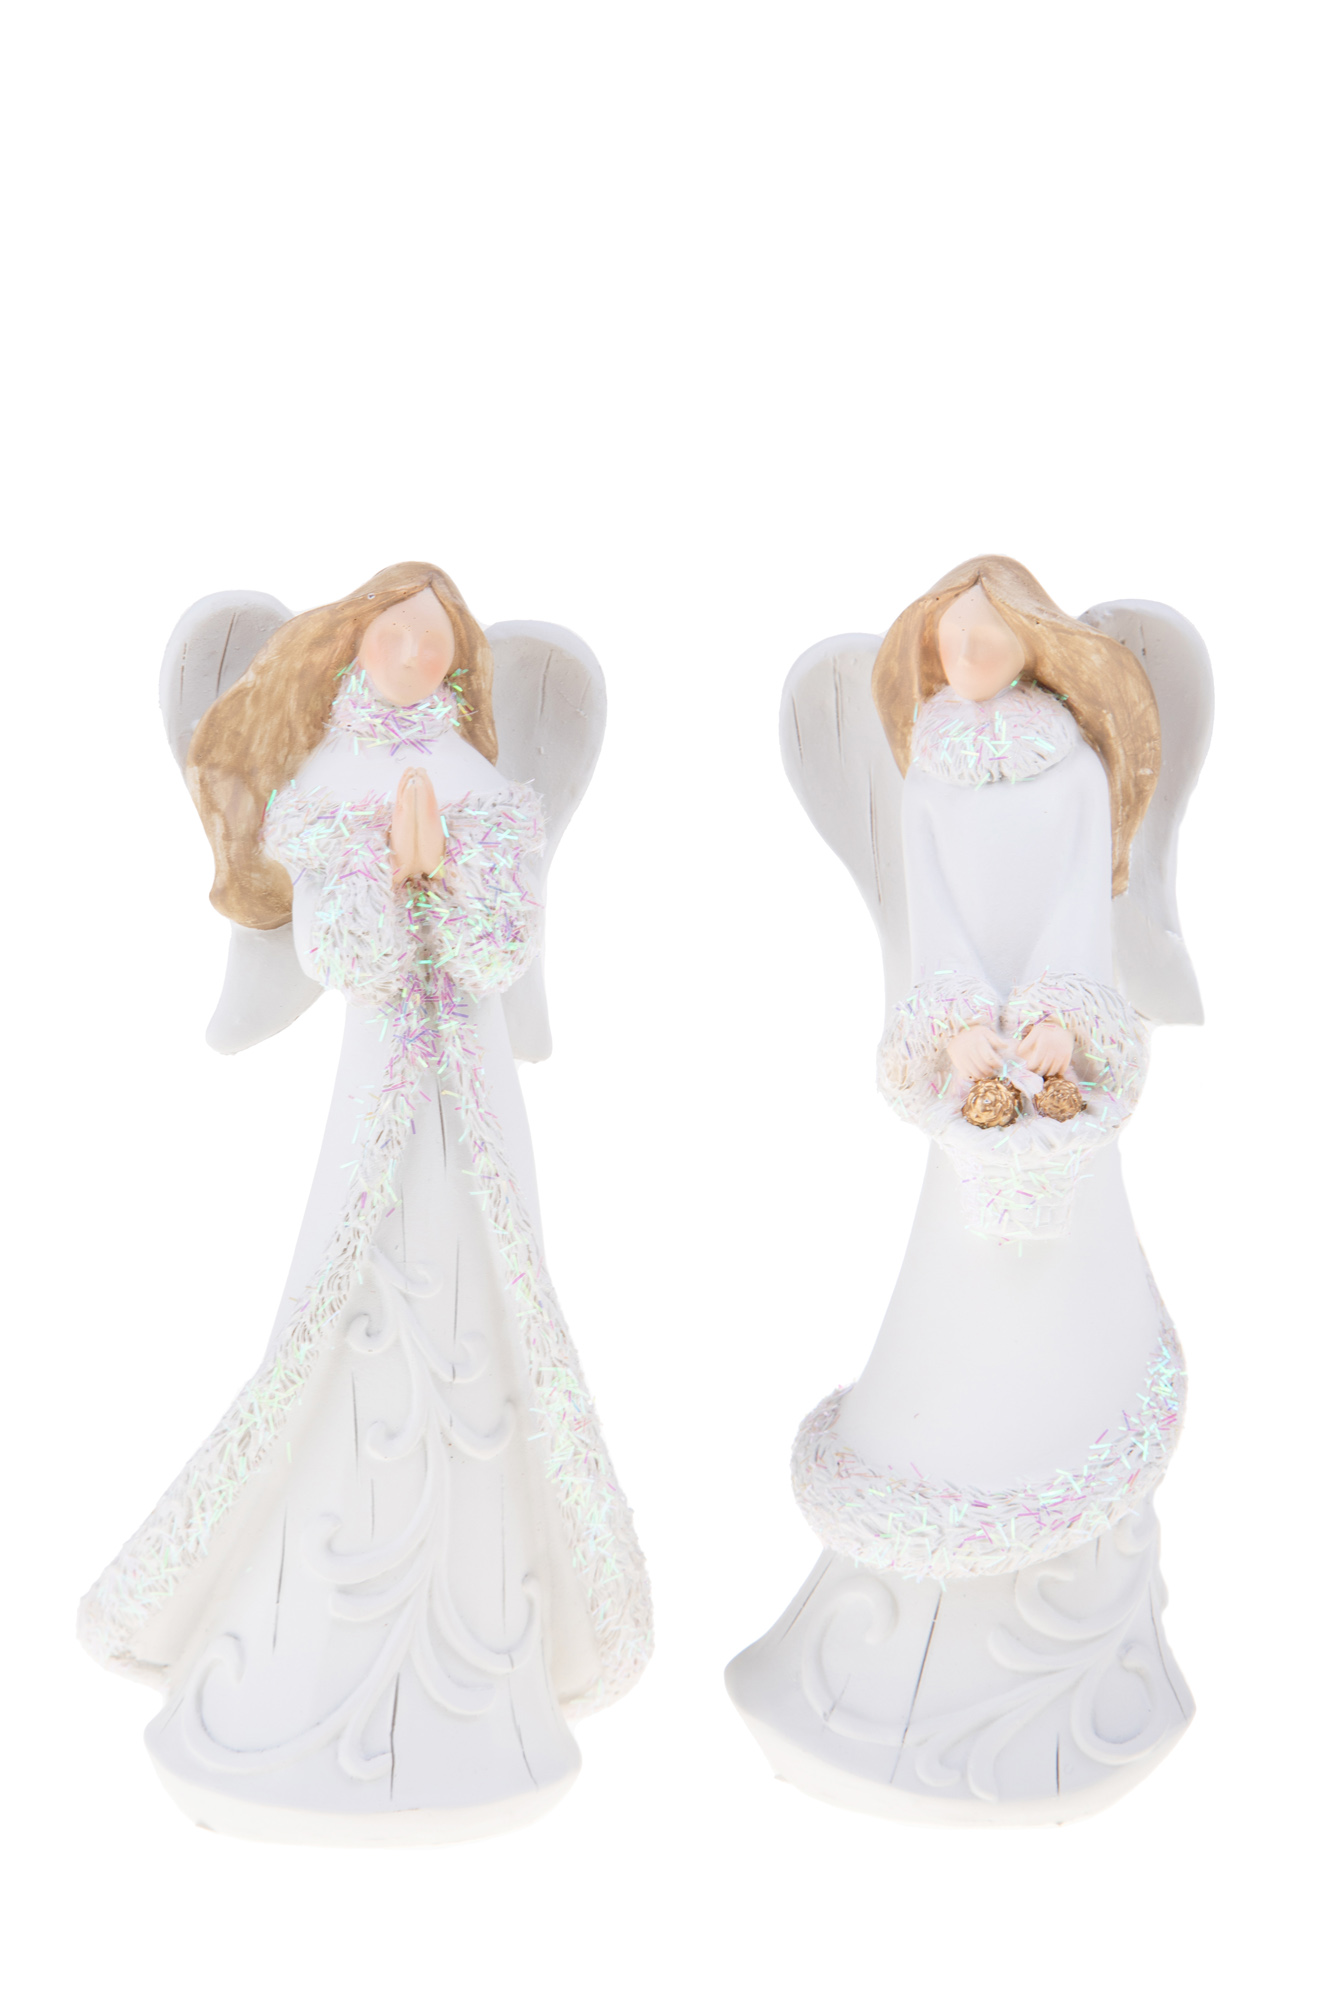 CHRISTMAS ITEMS, Angels, children and resin subjects, SET/2 ANGELI 16,5 CM C/GLITTER